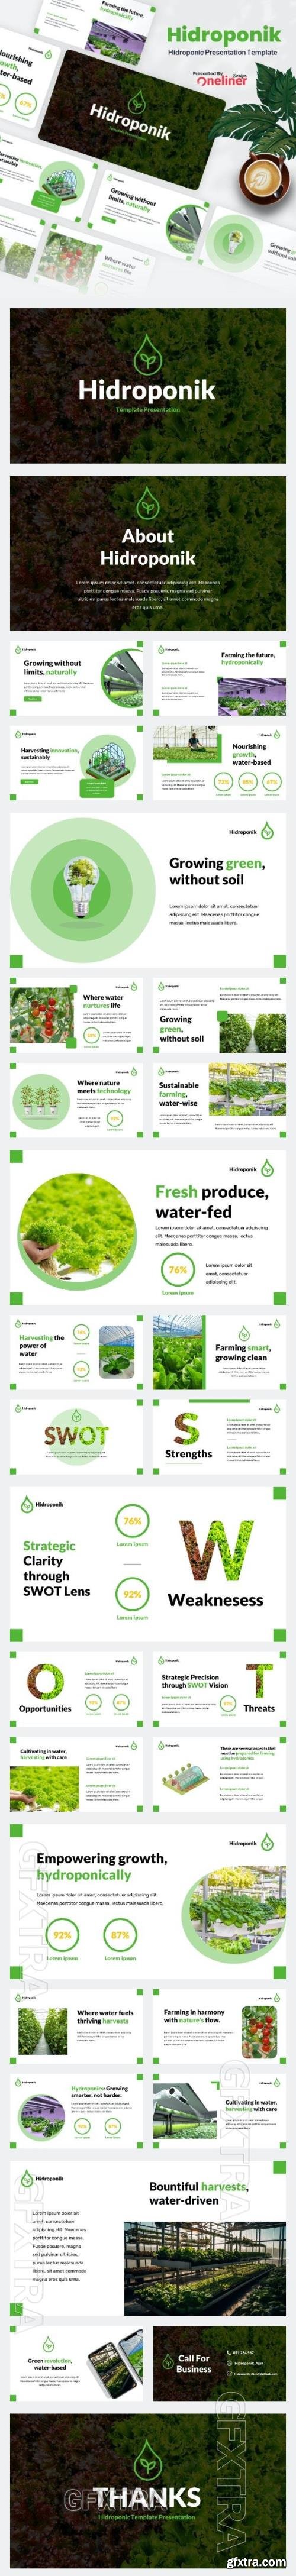 Hidroponic - Hydroponics Agriculture Powerpoint Template 49623904